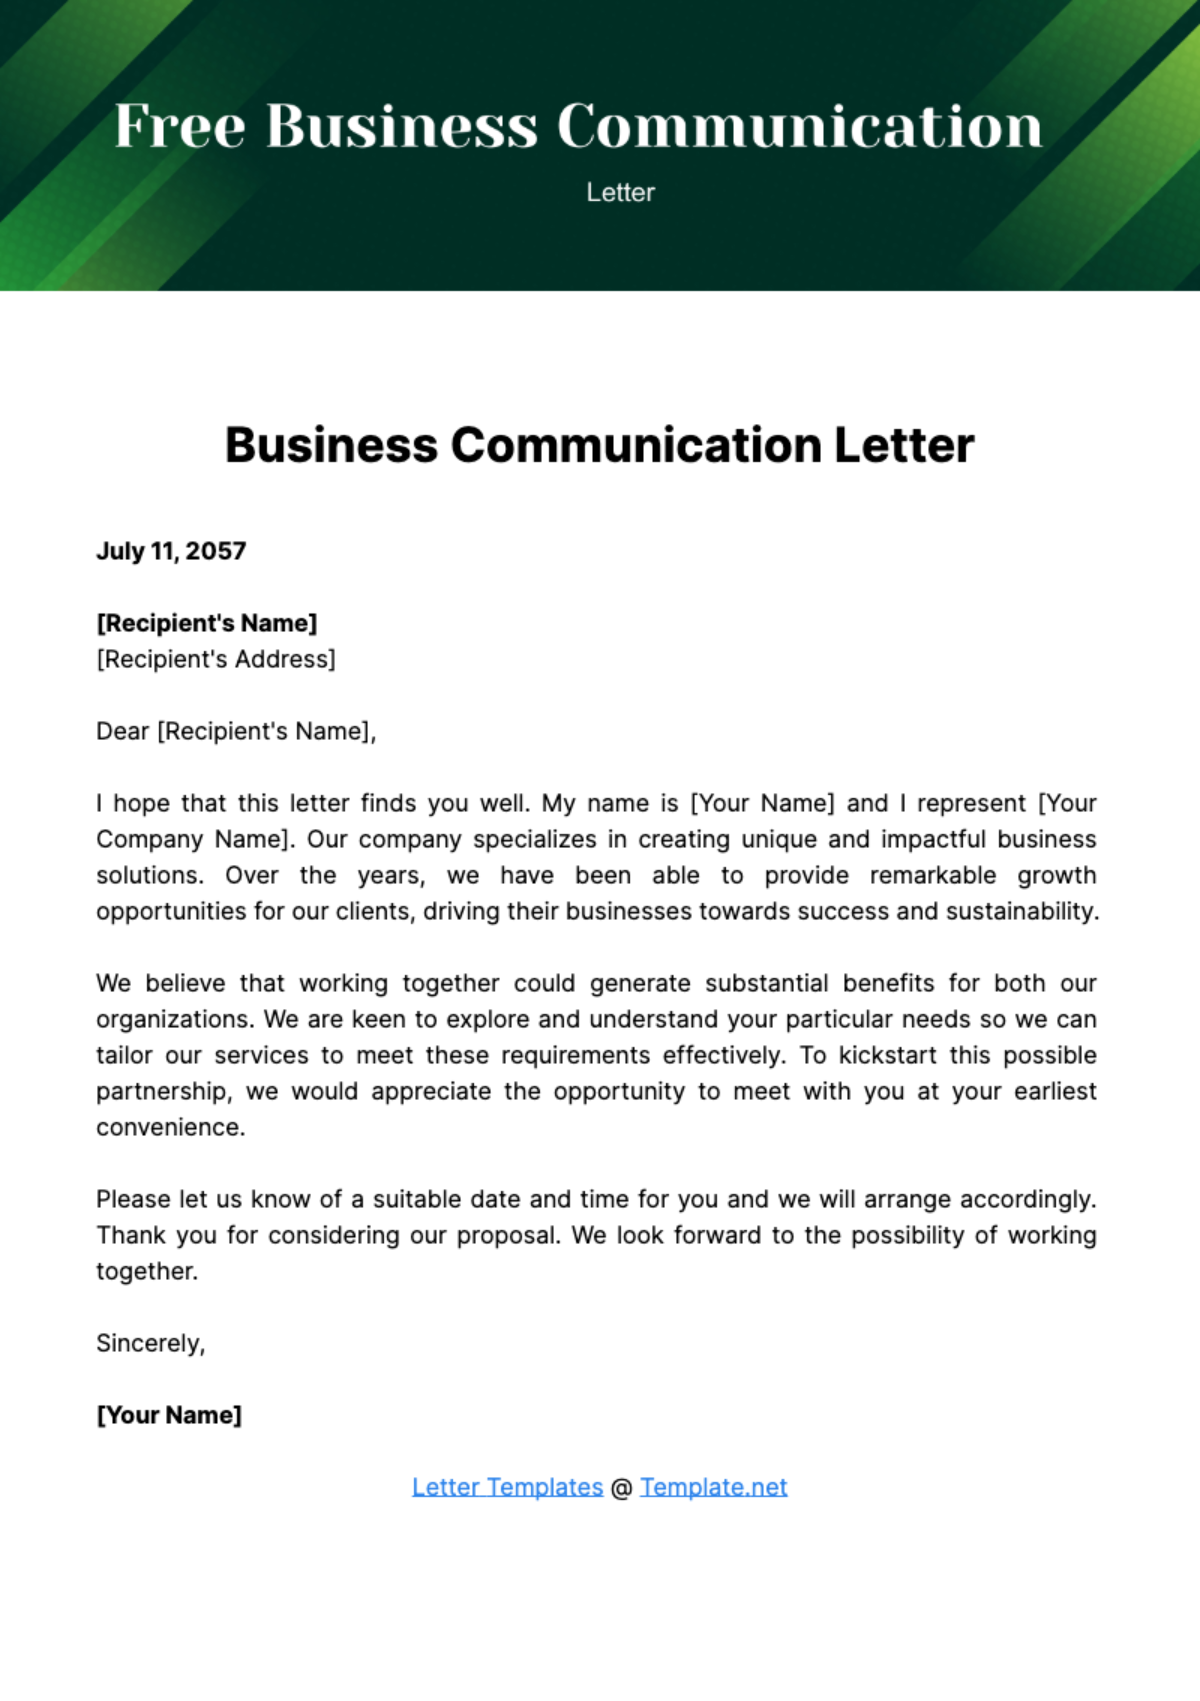 Business Communication Letter Template